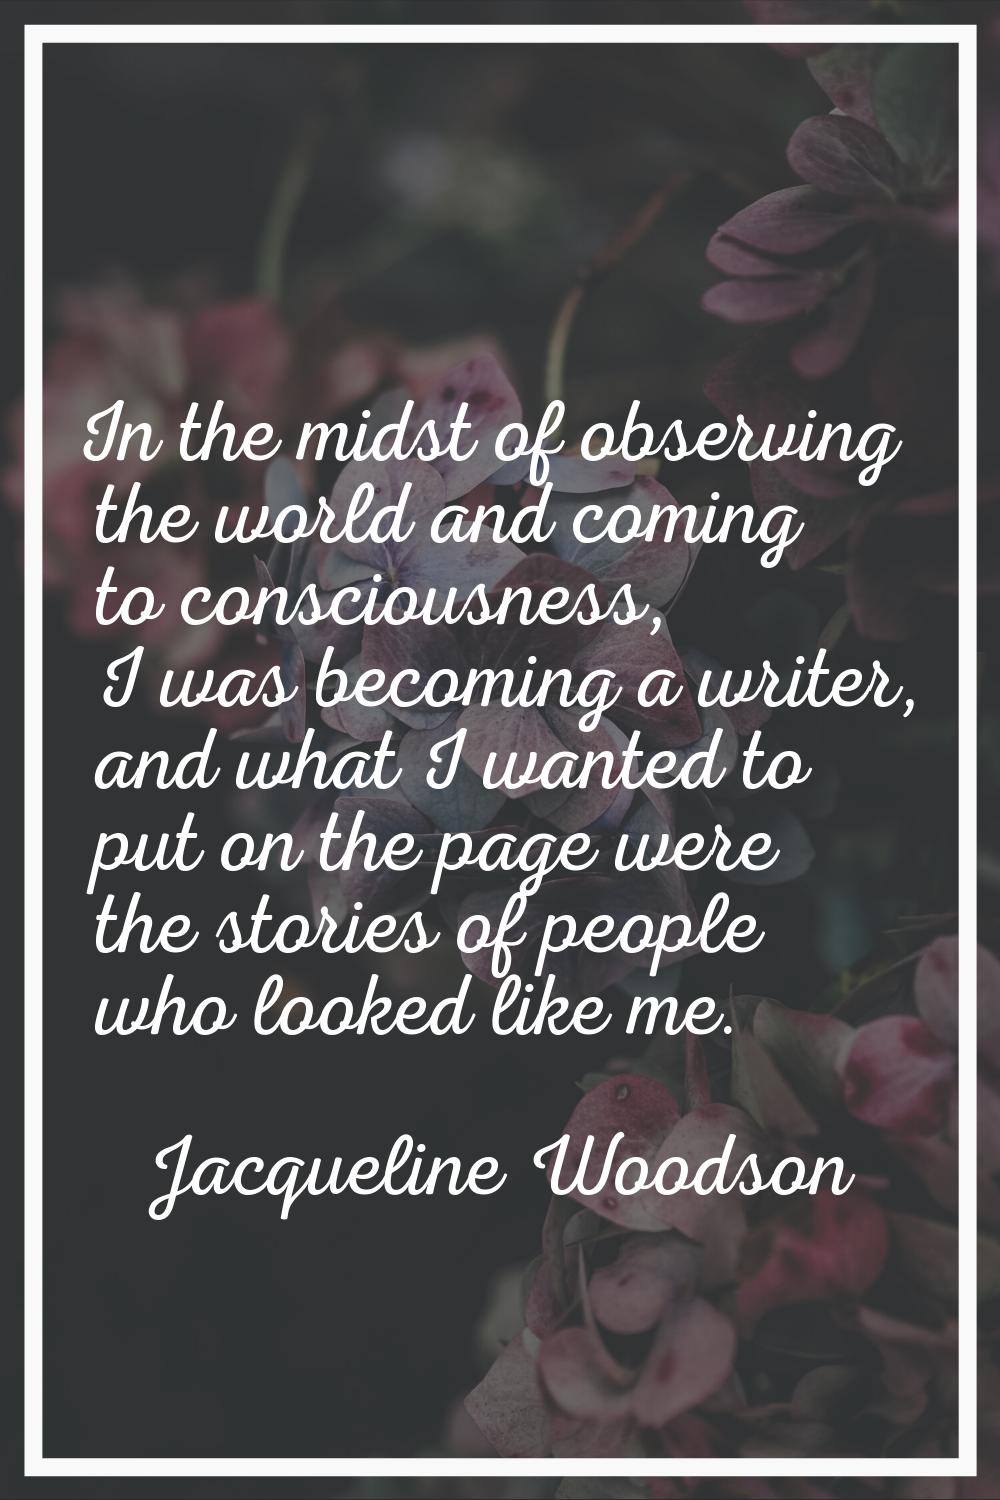 In the midst of observing the world and coming to consciousness, I was becoming a writer, and what 